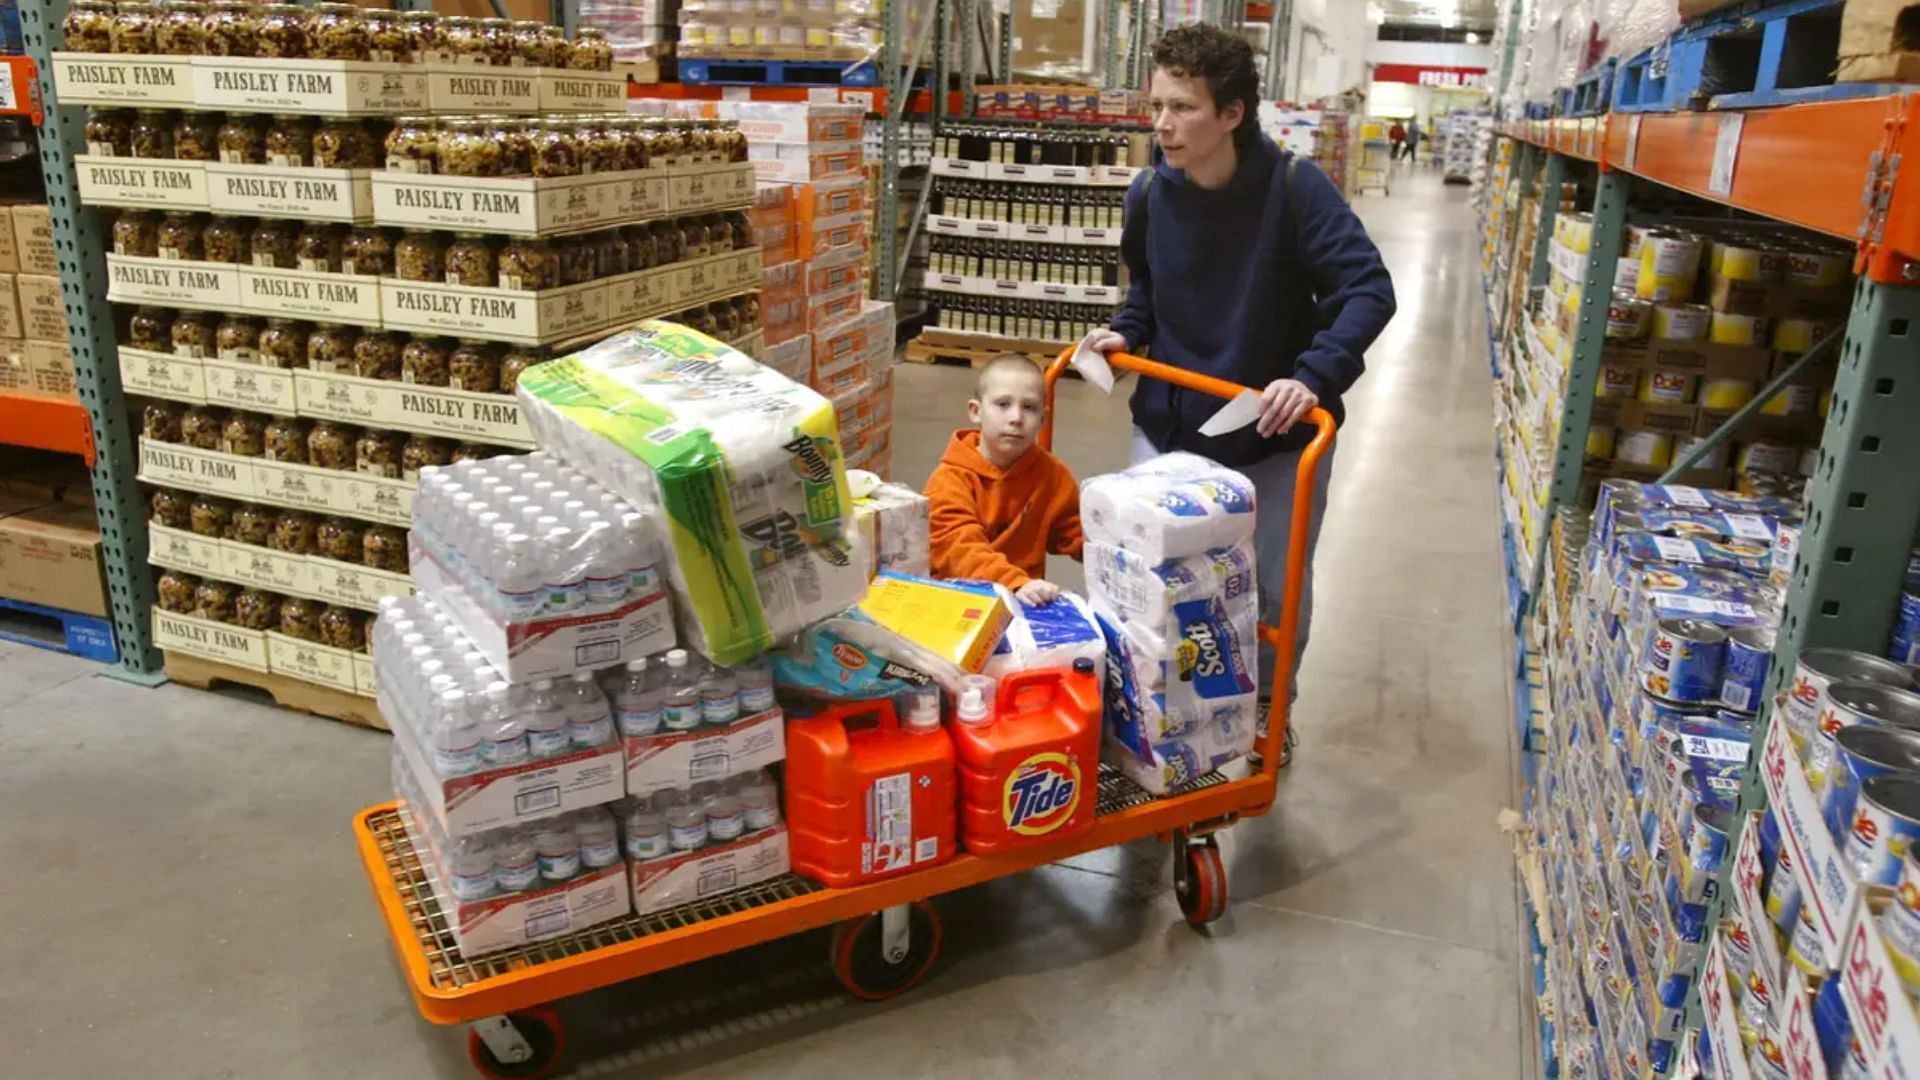 Costco offers limited-time deals on groceries and electronics (Image via Tim Boyle/Getty Images)